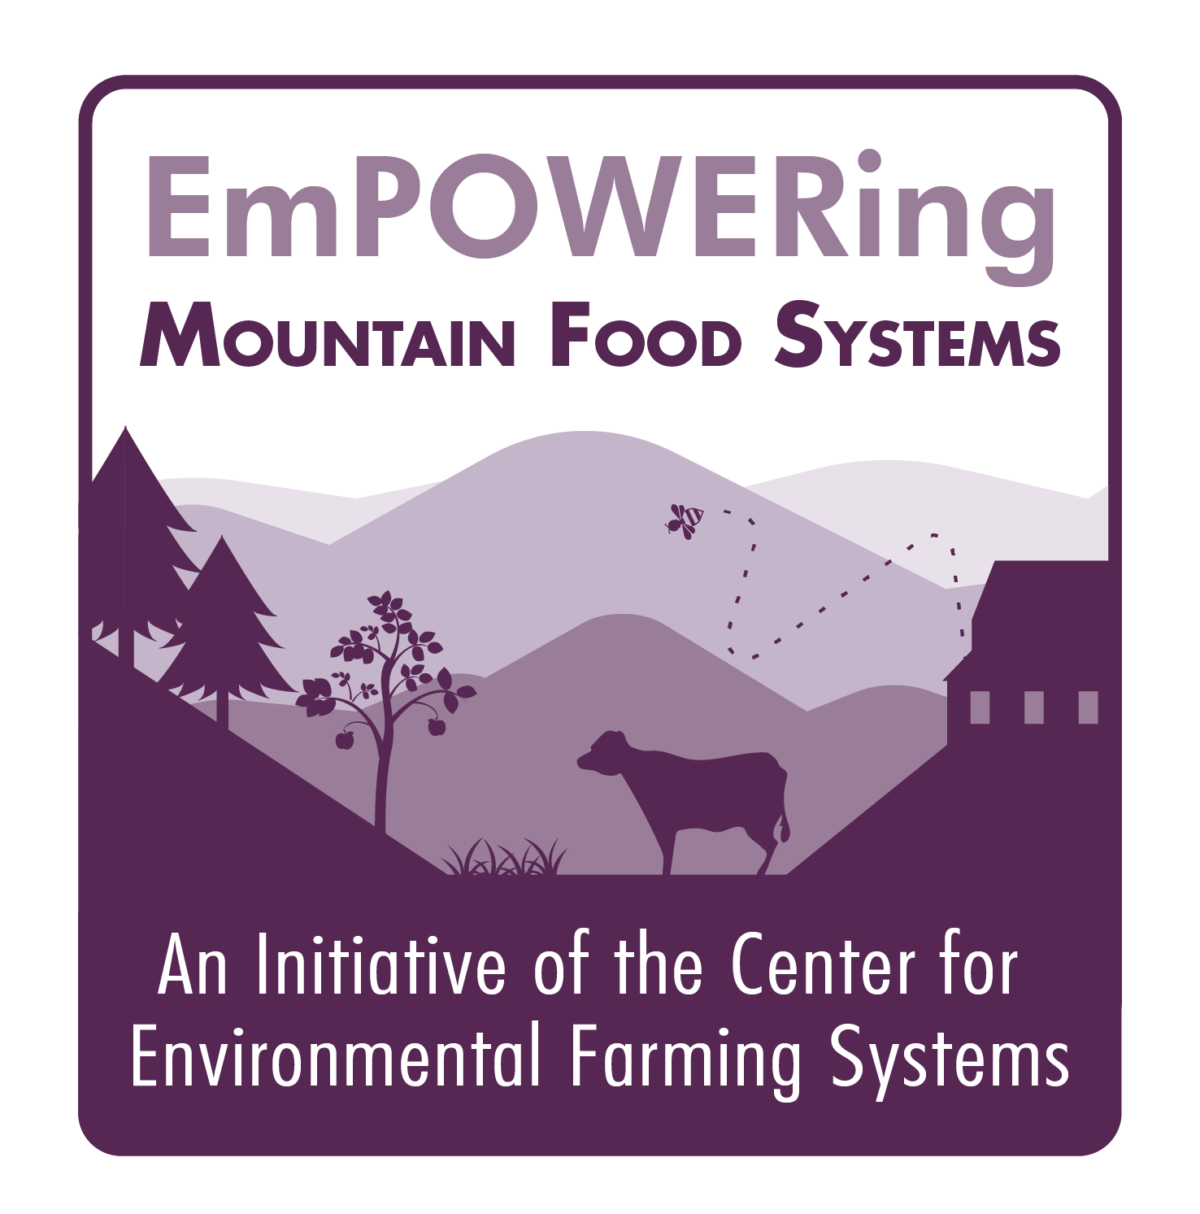 EmPOWERing Mountain Food Systems